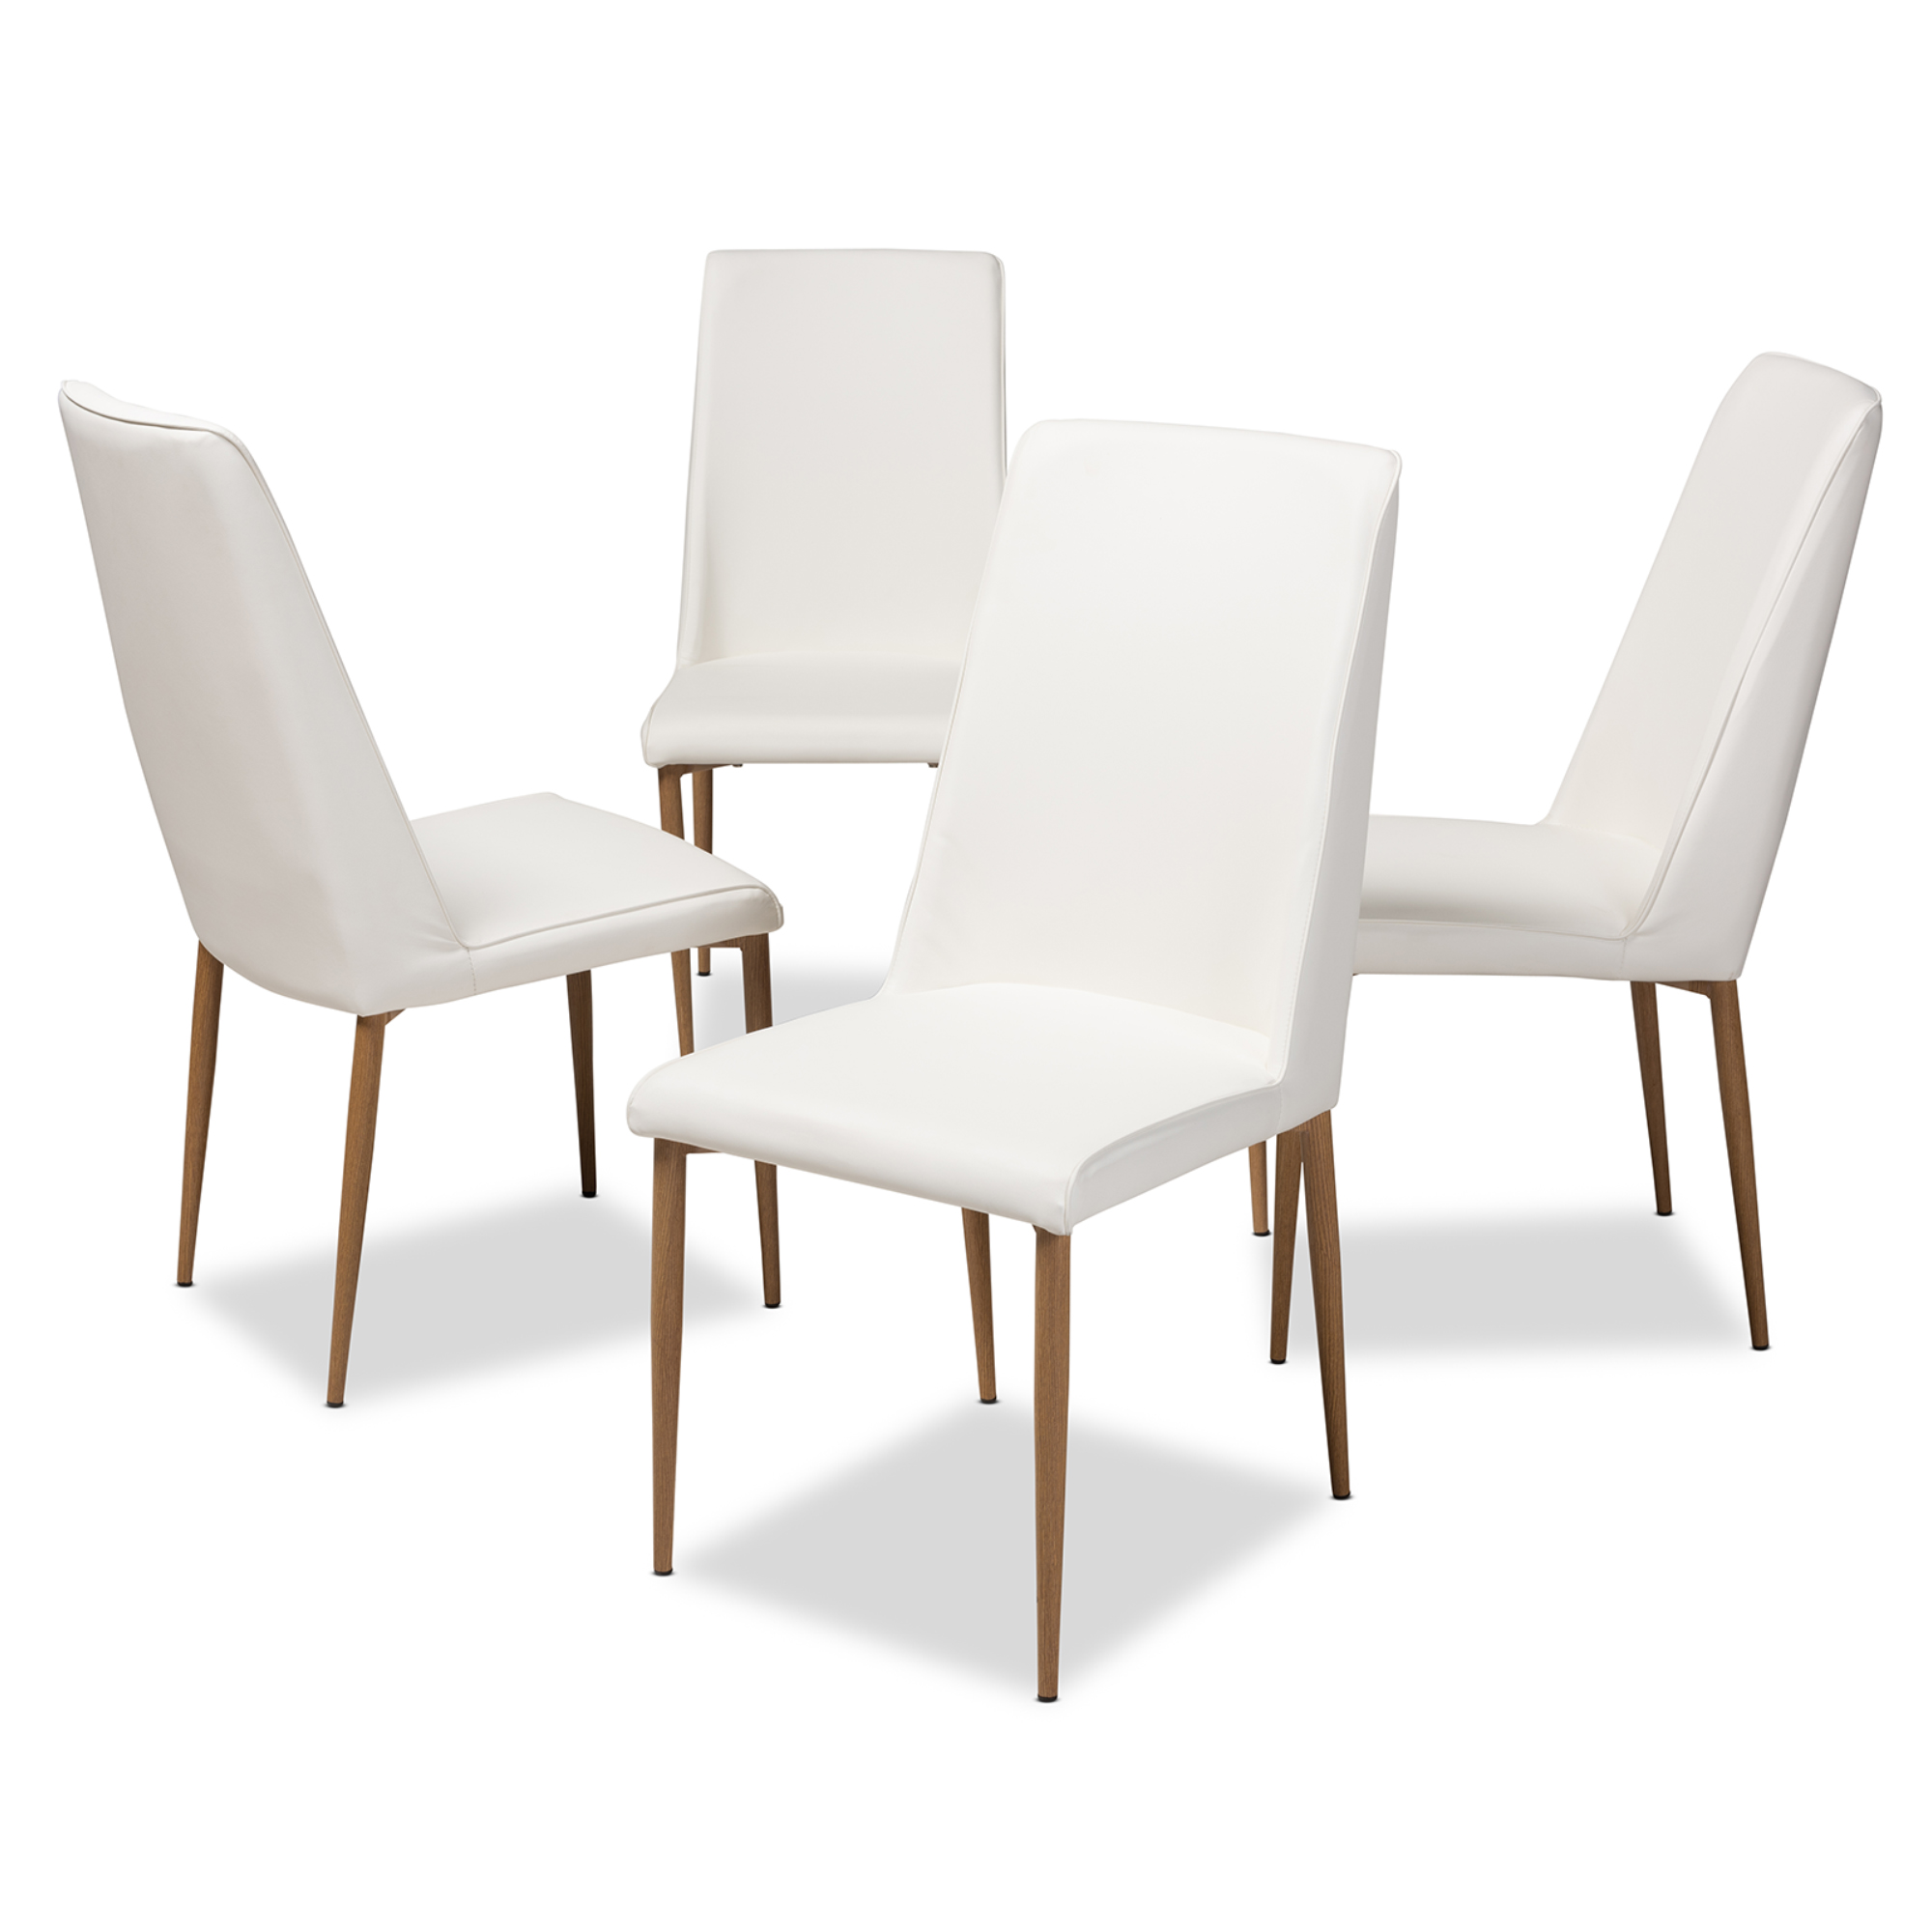 Baxton Studio Chandelle Modern and Contemporary White Faux Leather  Upholstered Dining Chair (Set of 4)